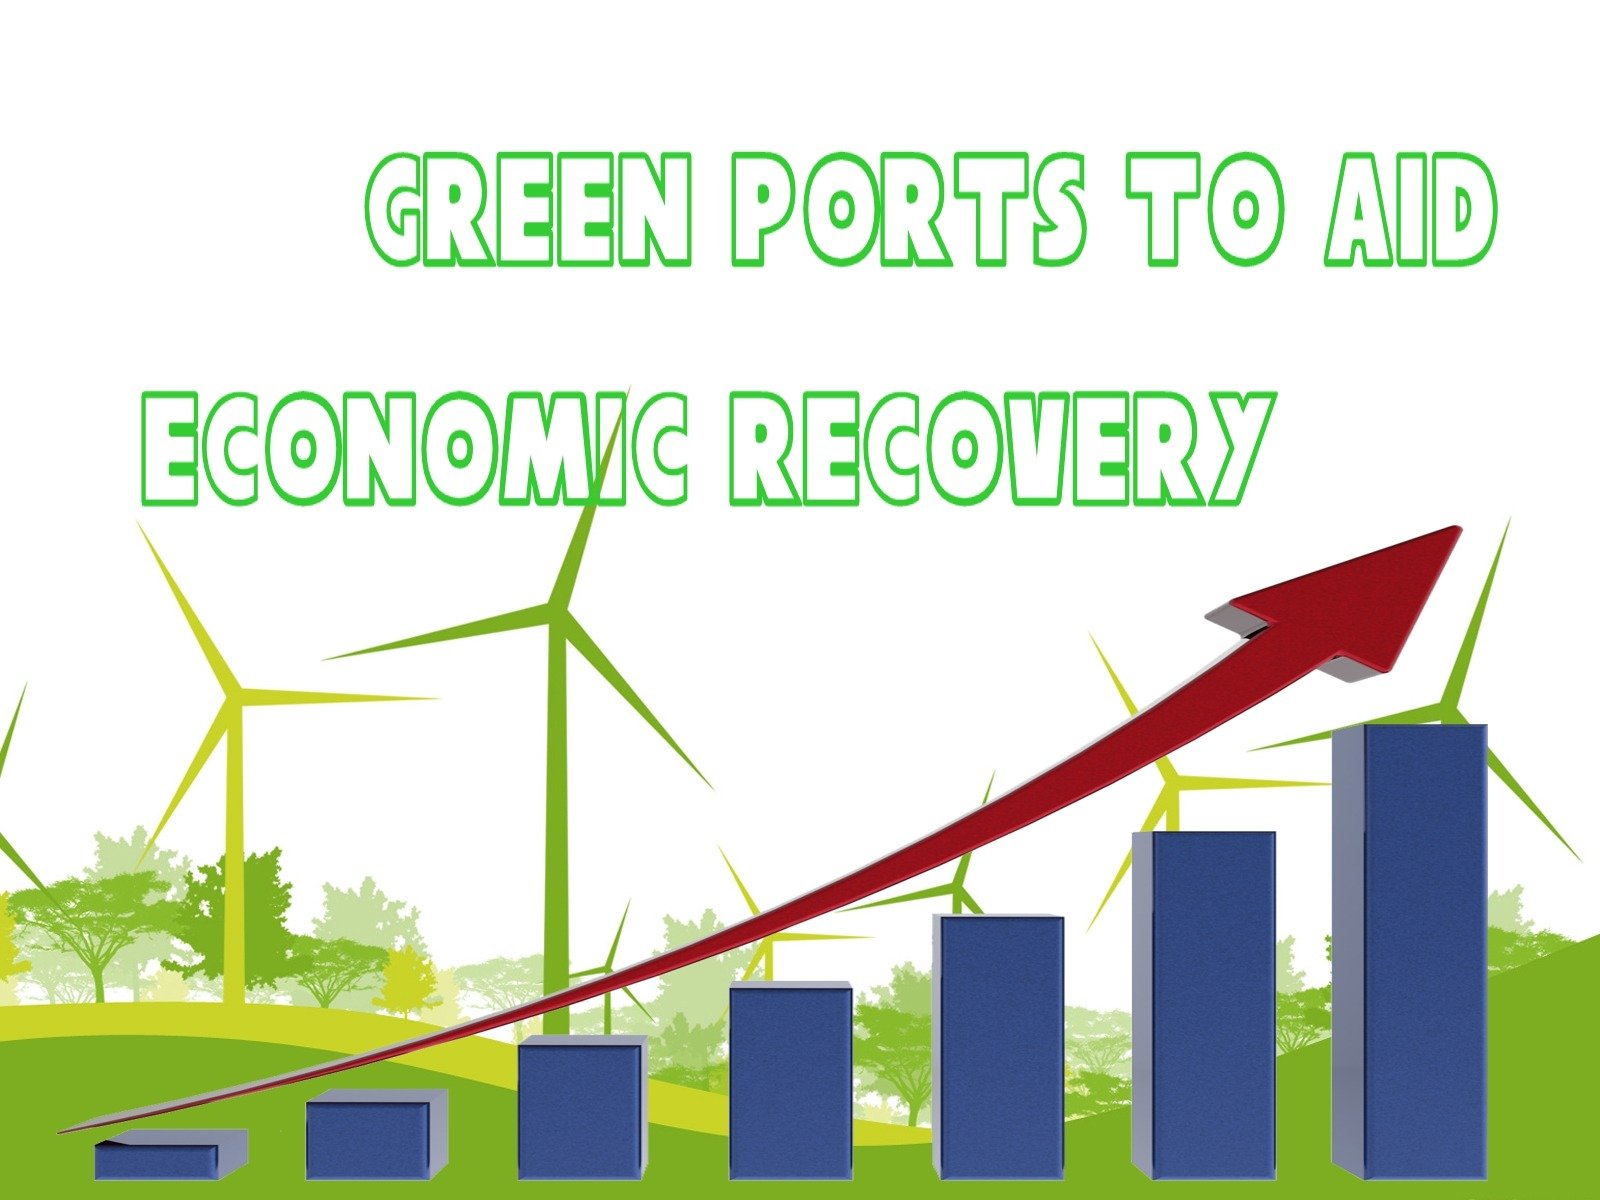 Green ports to aid economic recovery